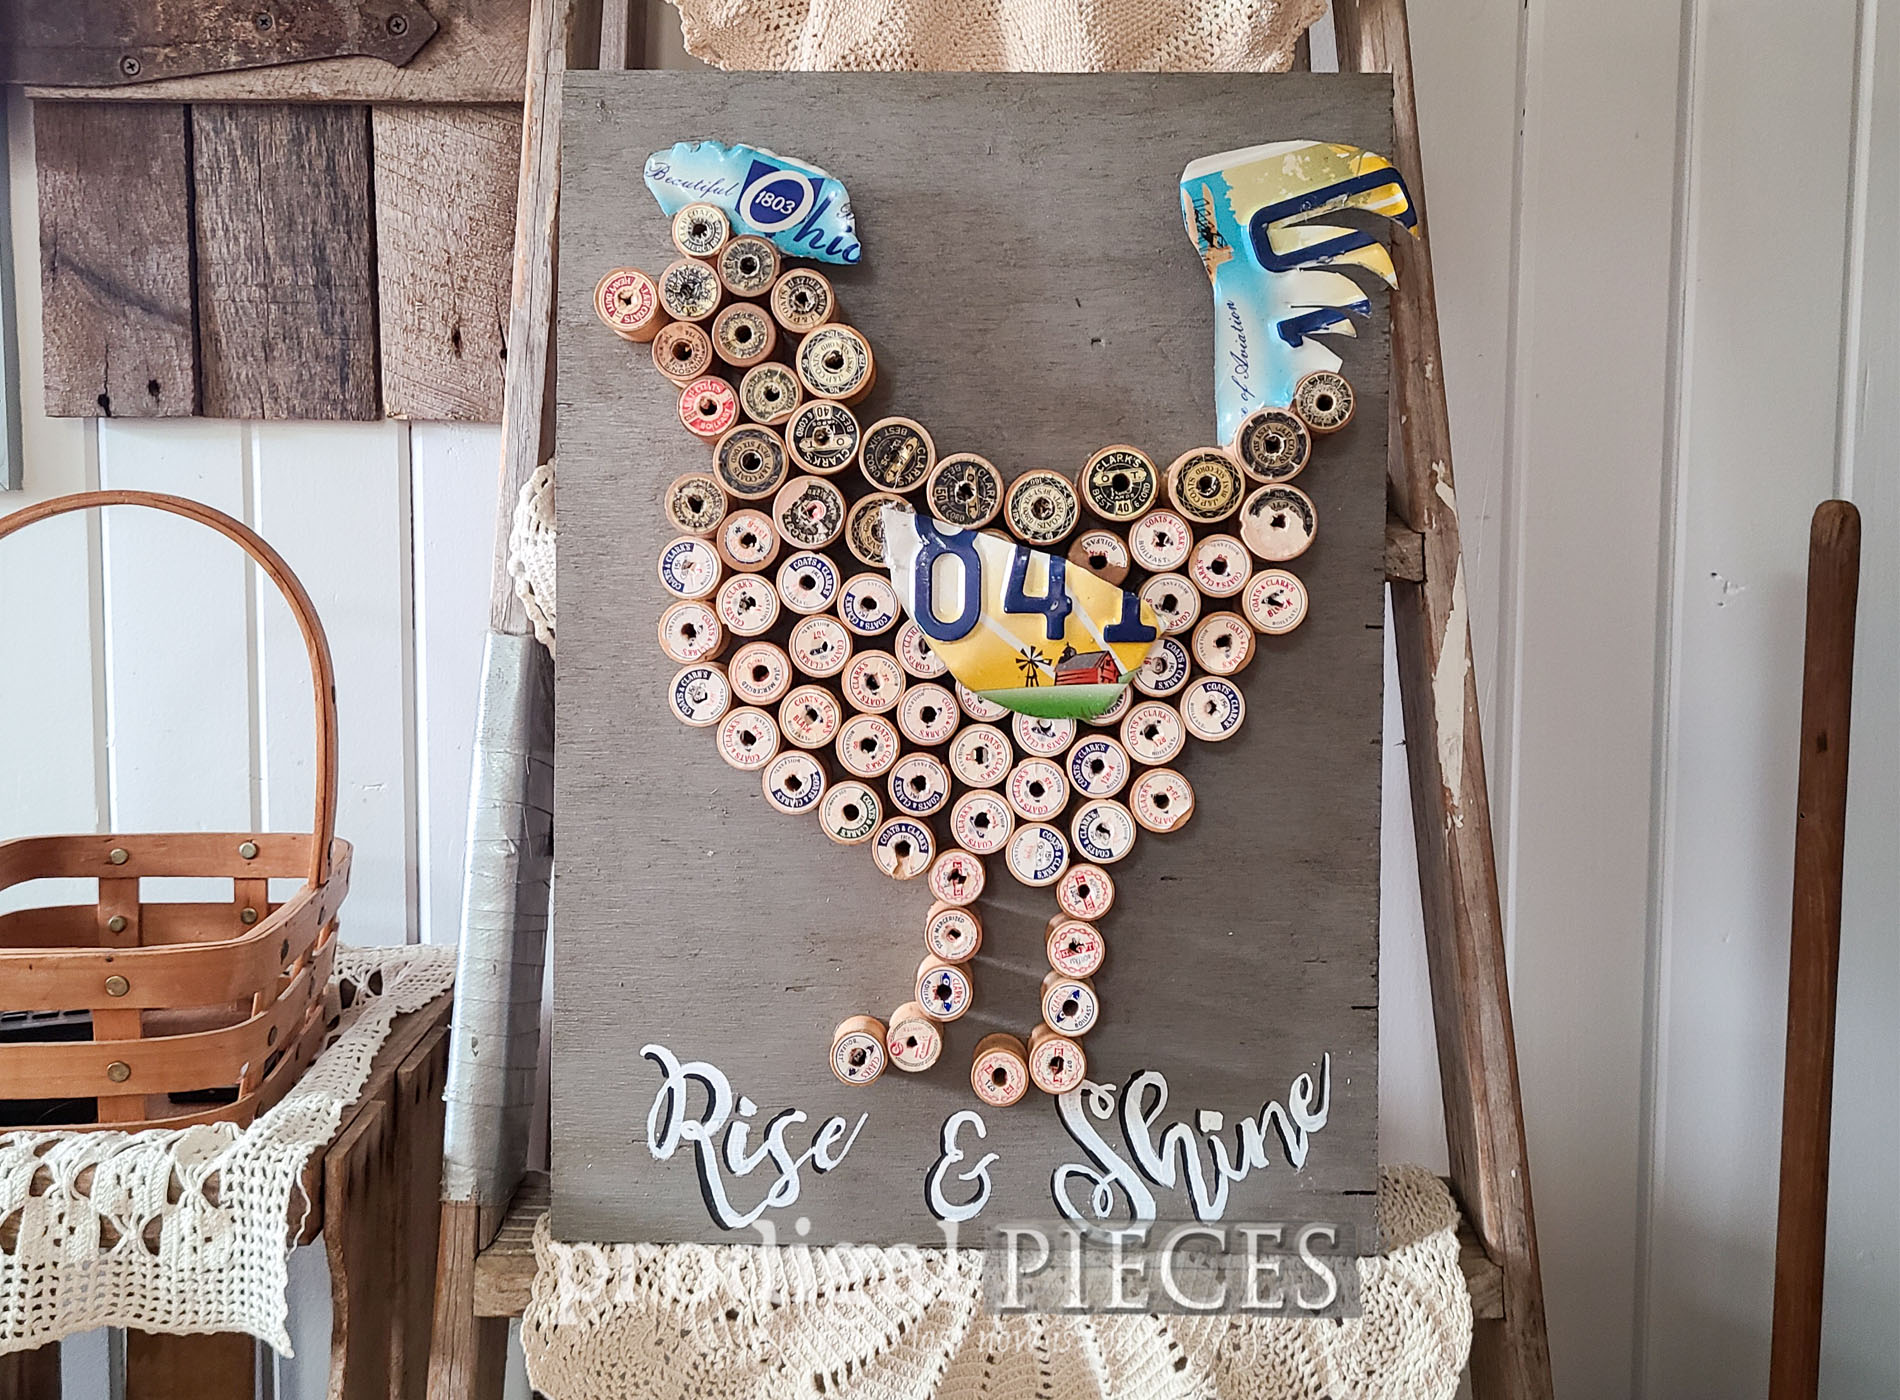 Featured Upcycled Wooden Thread Spool Art Created by Larissa of Prodigal Pieces | prodigalpieces.com #prodigalpieces #art #reclaimed #sewing #farmhouse #chicken